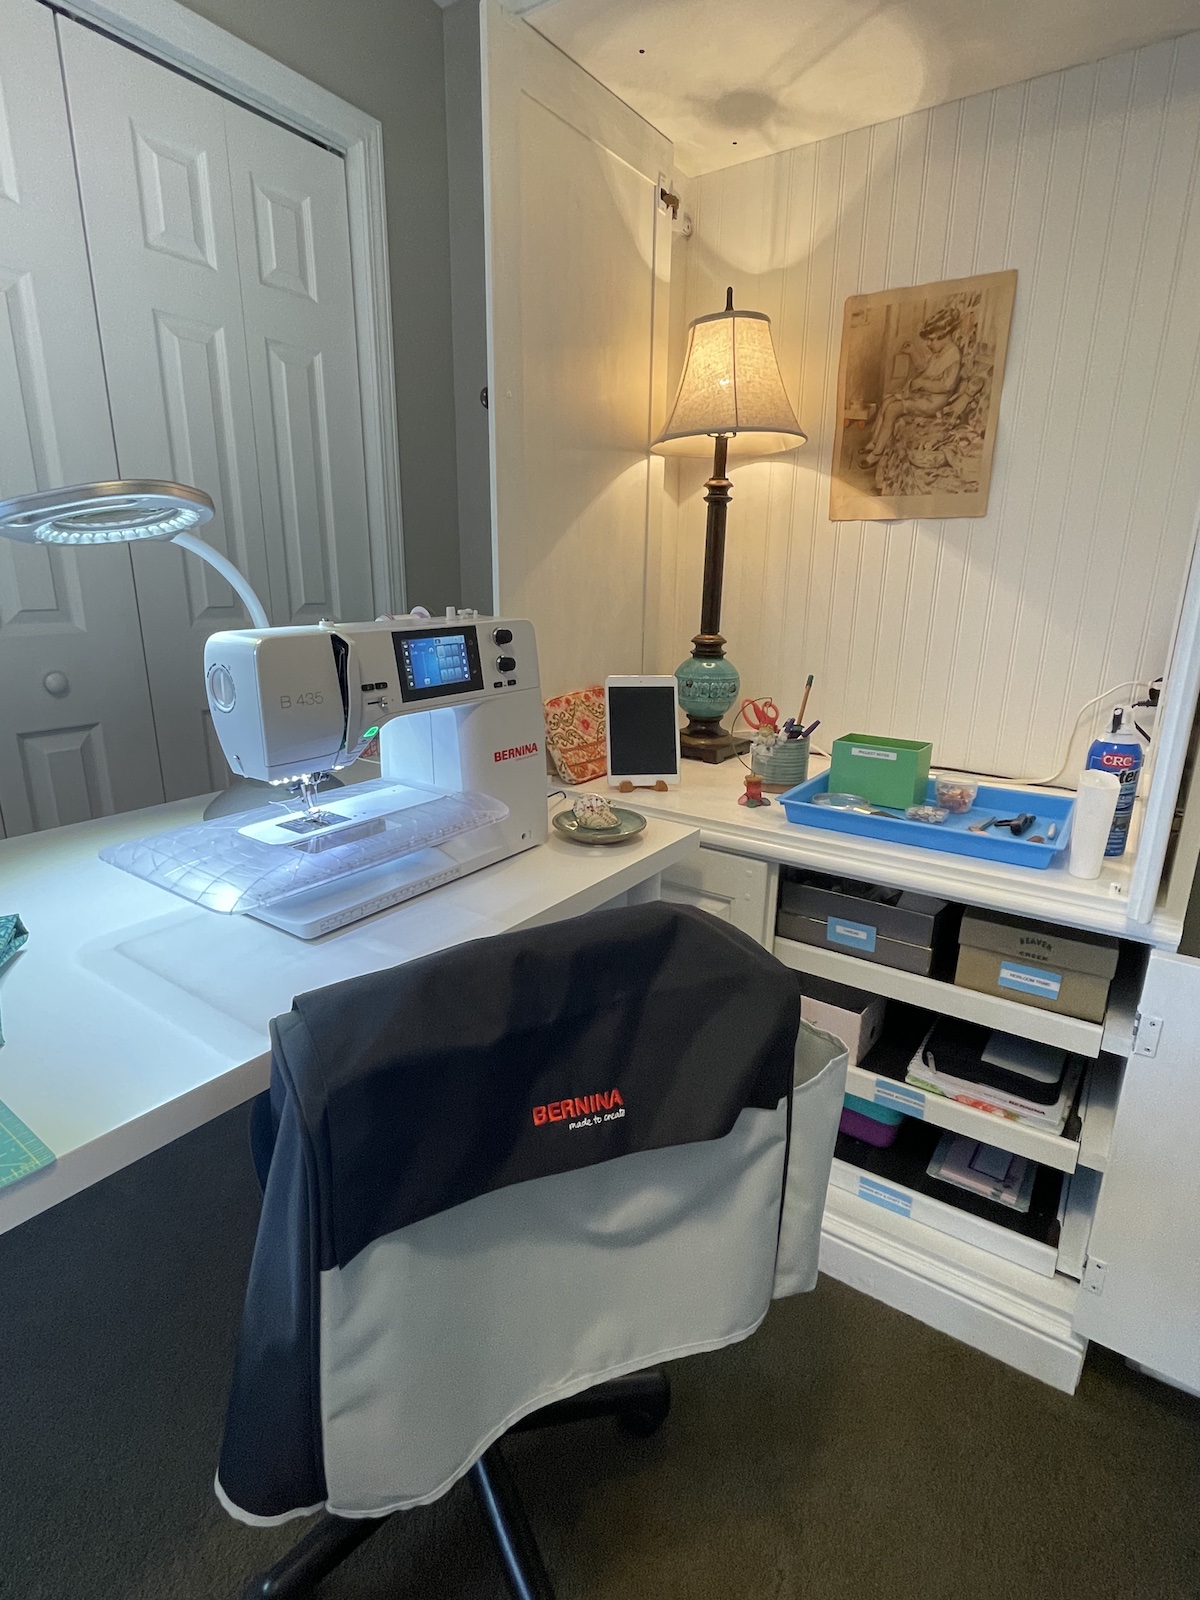 Sewing Space Tutorial: Transformation Guest Room to Sewing Room 3